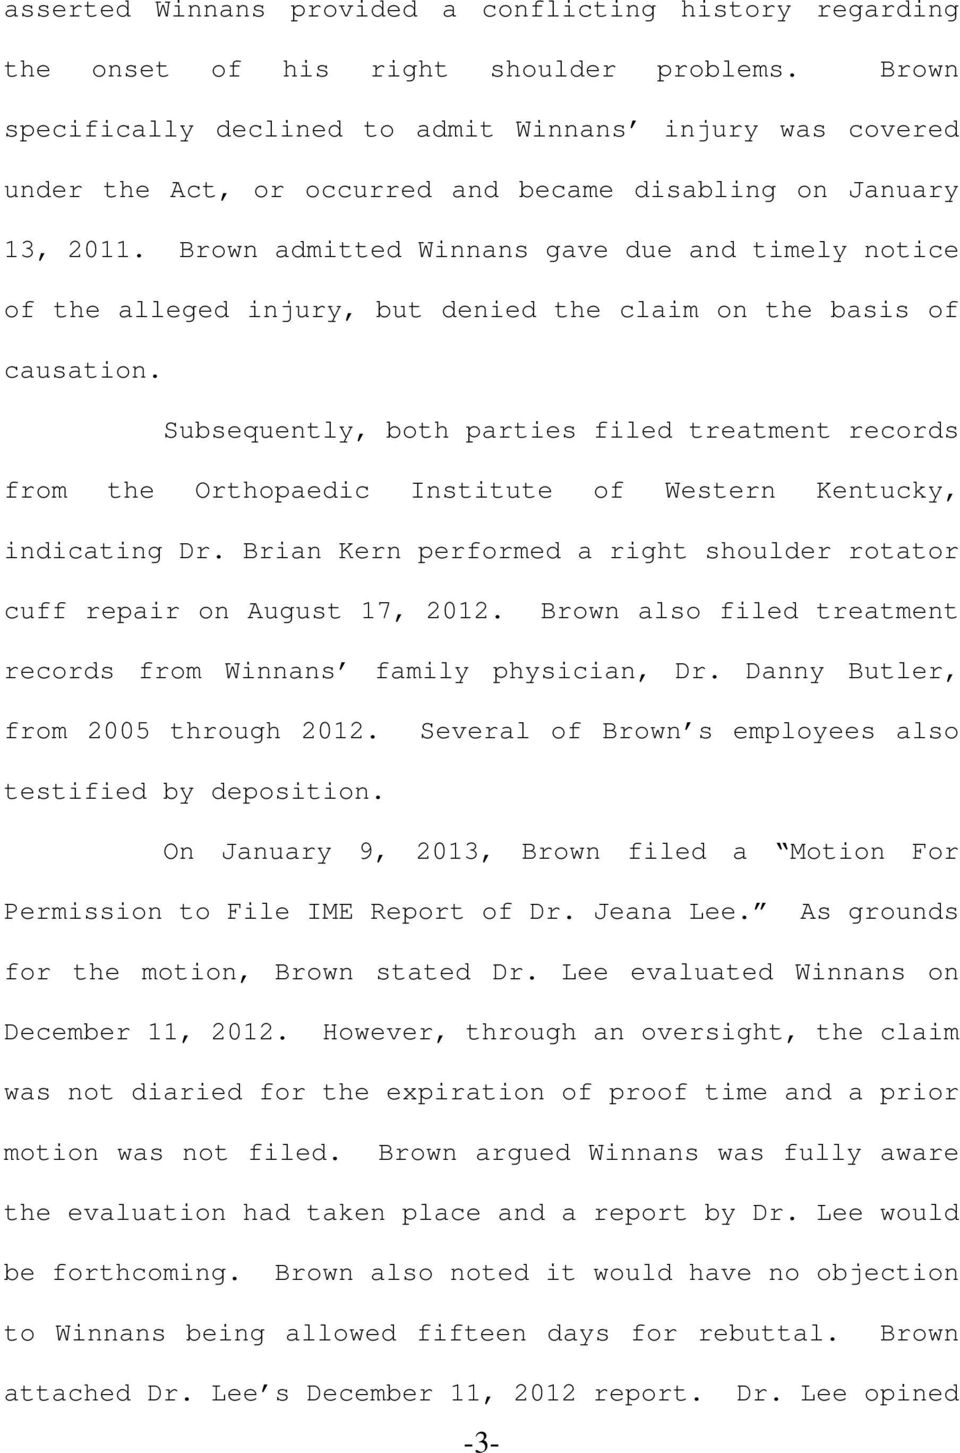 Brown admitted Winnans gave due and timely notice of the alleged injury, but denied the claim on the basis of causation.